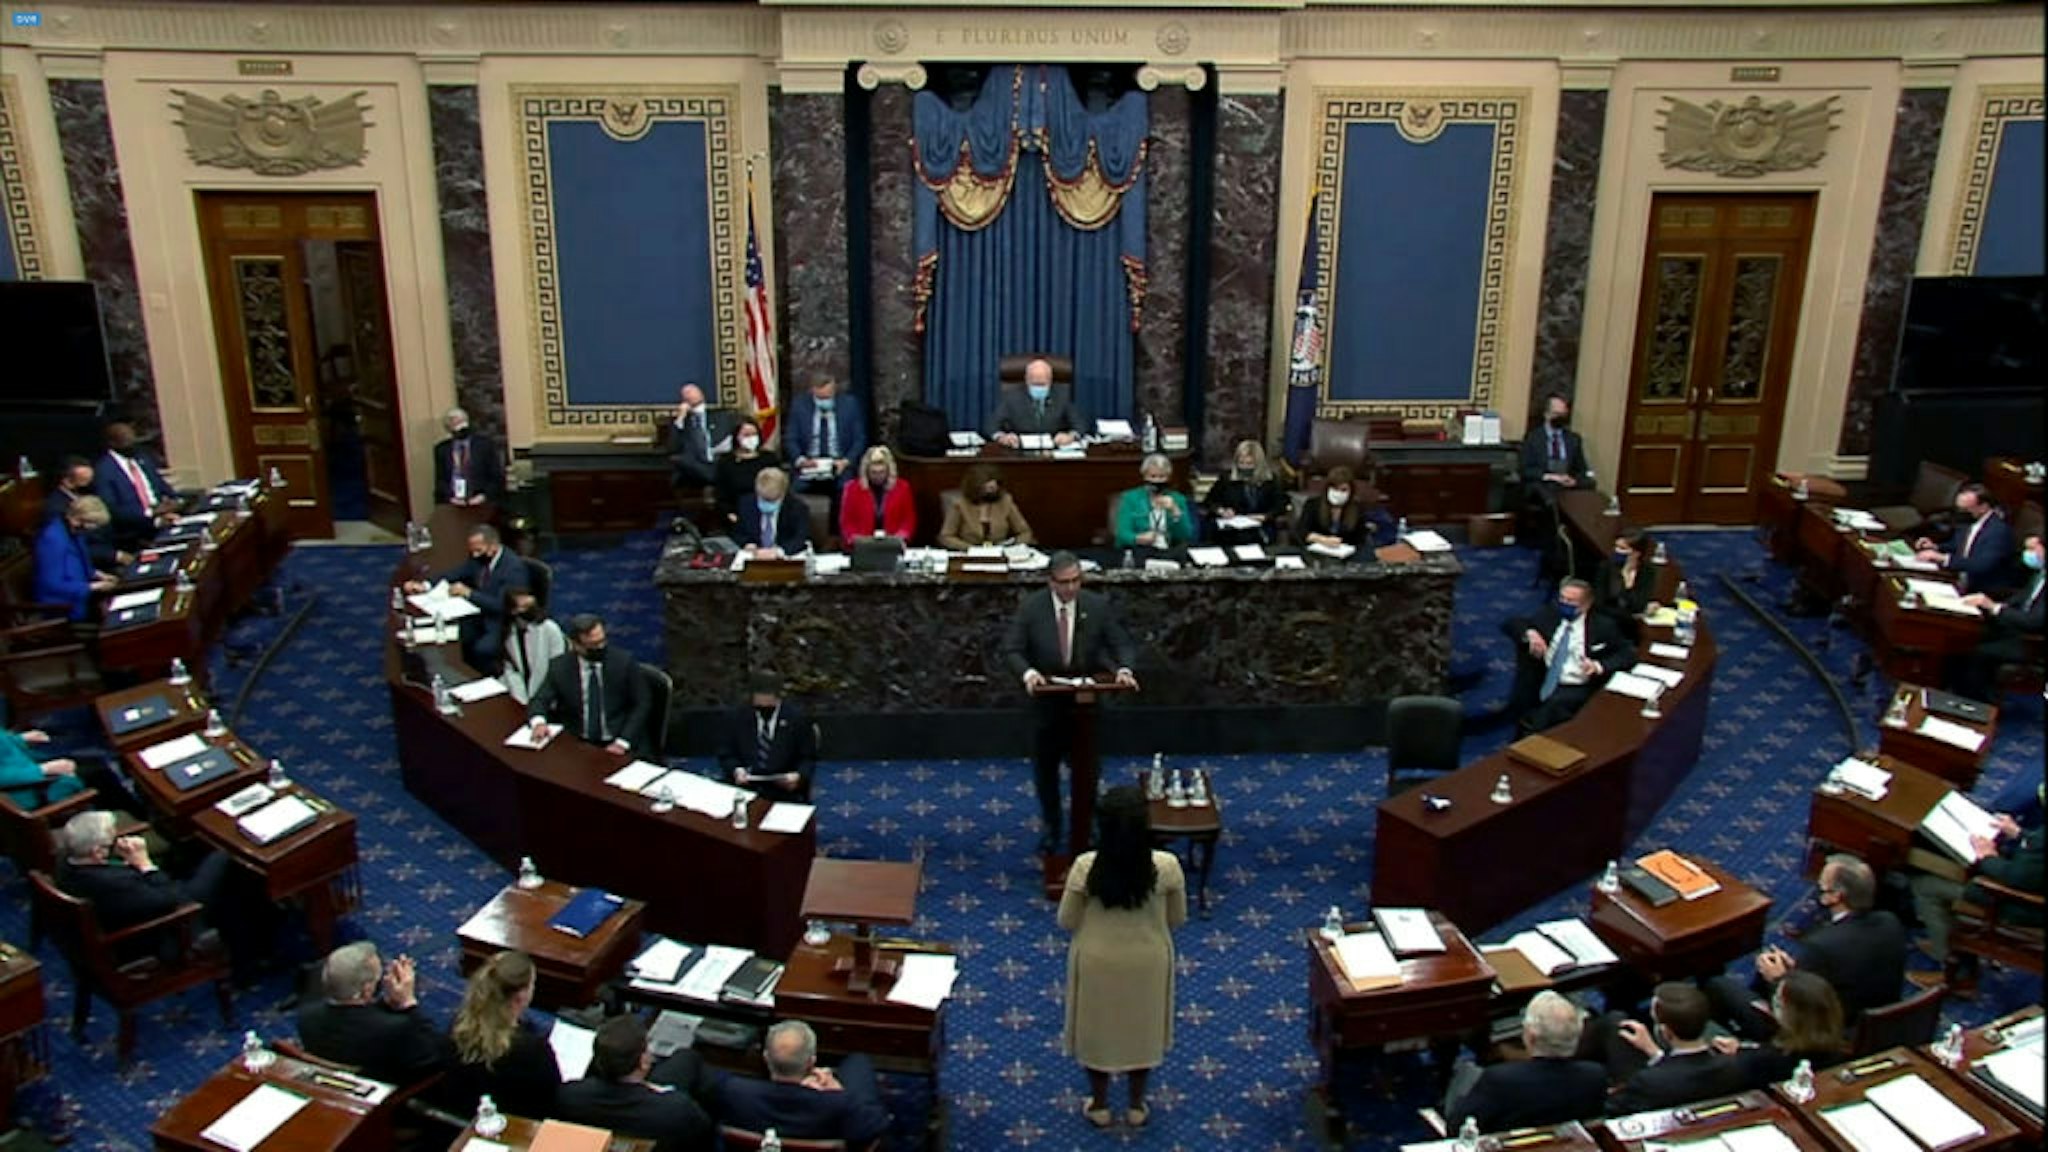 WASHINGTON, DC - FEBRUARY 13: In this screenshot taken from a congress.gov webcast, Bruce Castor Jr., defense lawyer for former President Donald Trump, speaks on the fifth day of former President Donald Trump's second impeachment trial at the U.S. Capitol on February 13, 2021 in Washington, DC. In a surprise move, the Senate voted 55-45 to call witnesses in the impeachment trial. House impeachment managers had argued that Trump was “singularly responsible” for the January 6th attack at the U.S. Capitol and he should be convicted and barred from ever holding public office again.